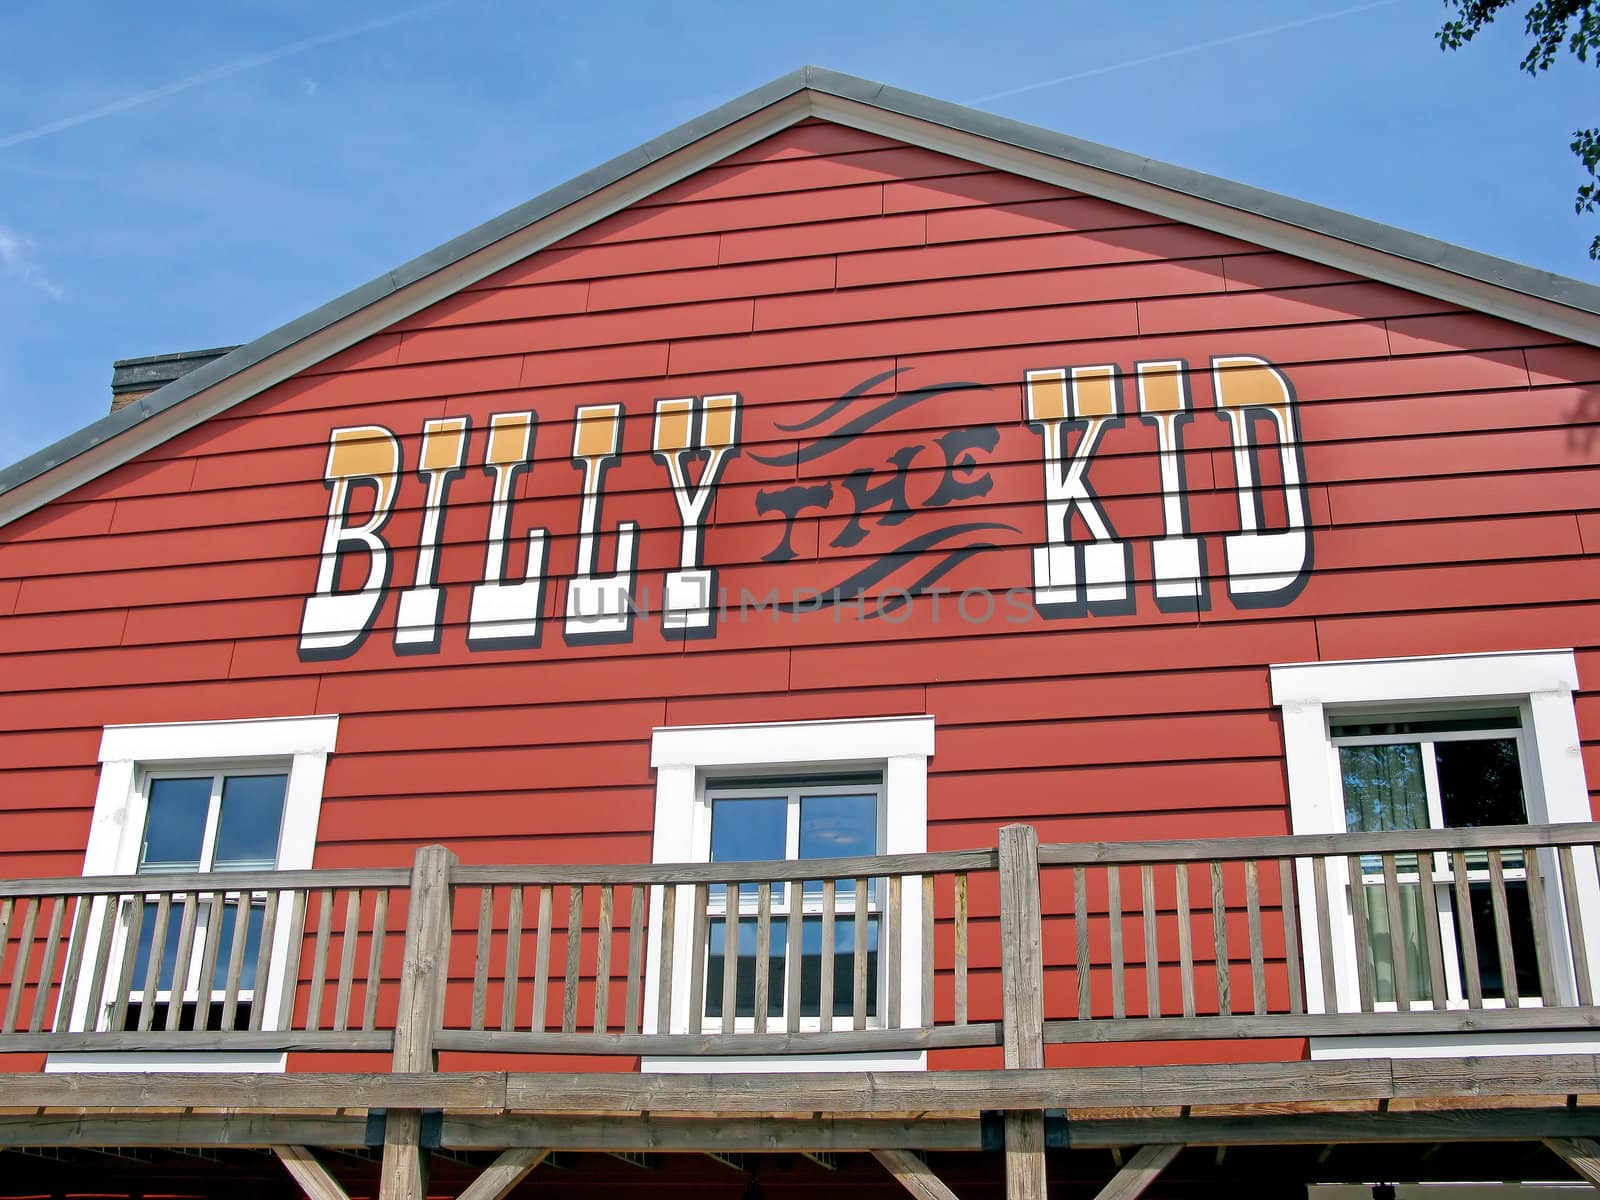 Billy the Kid Wooden building in red.